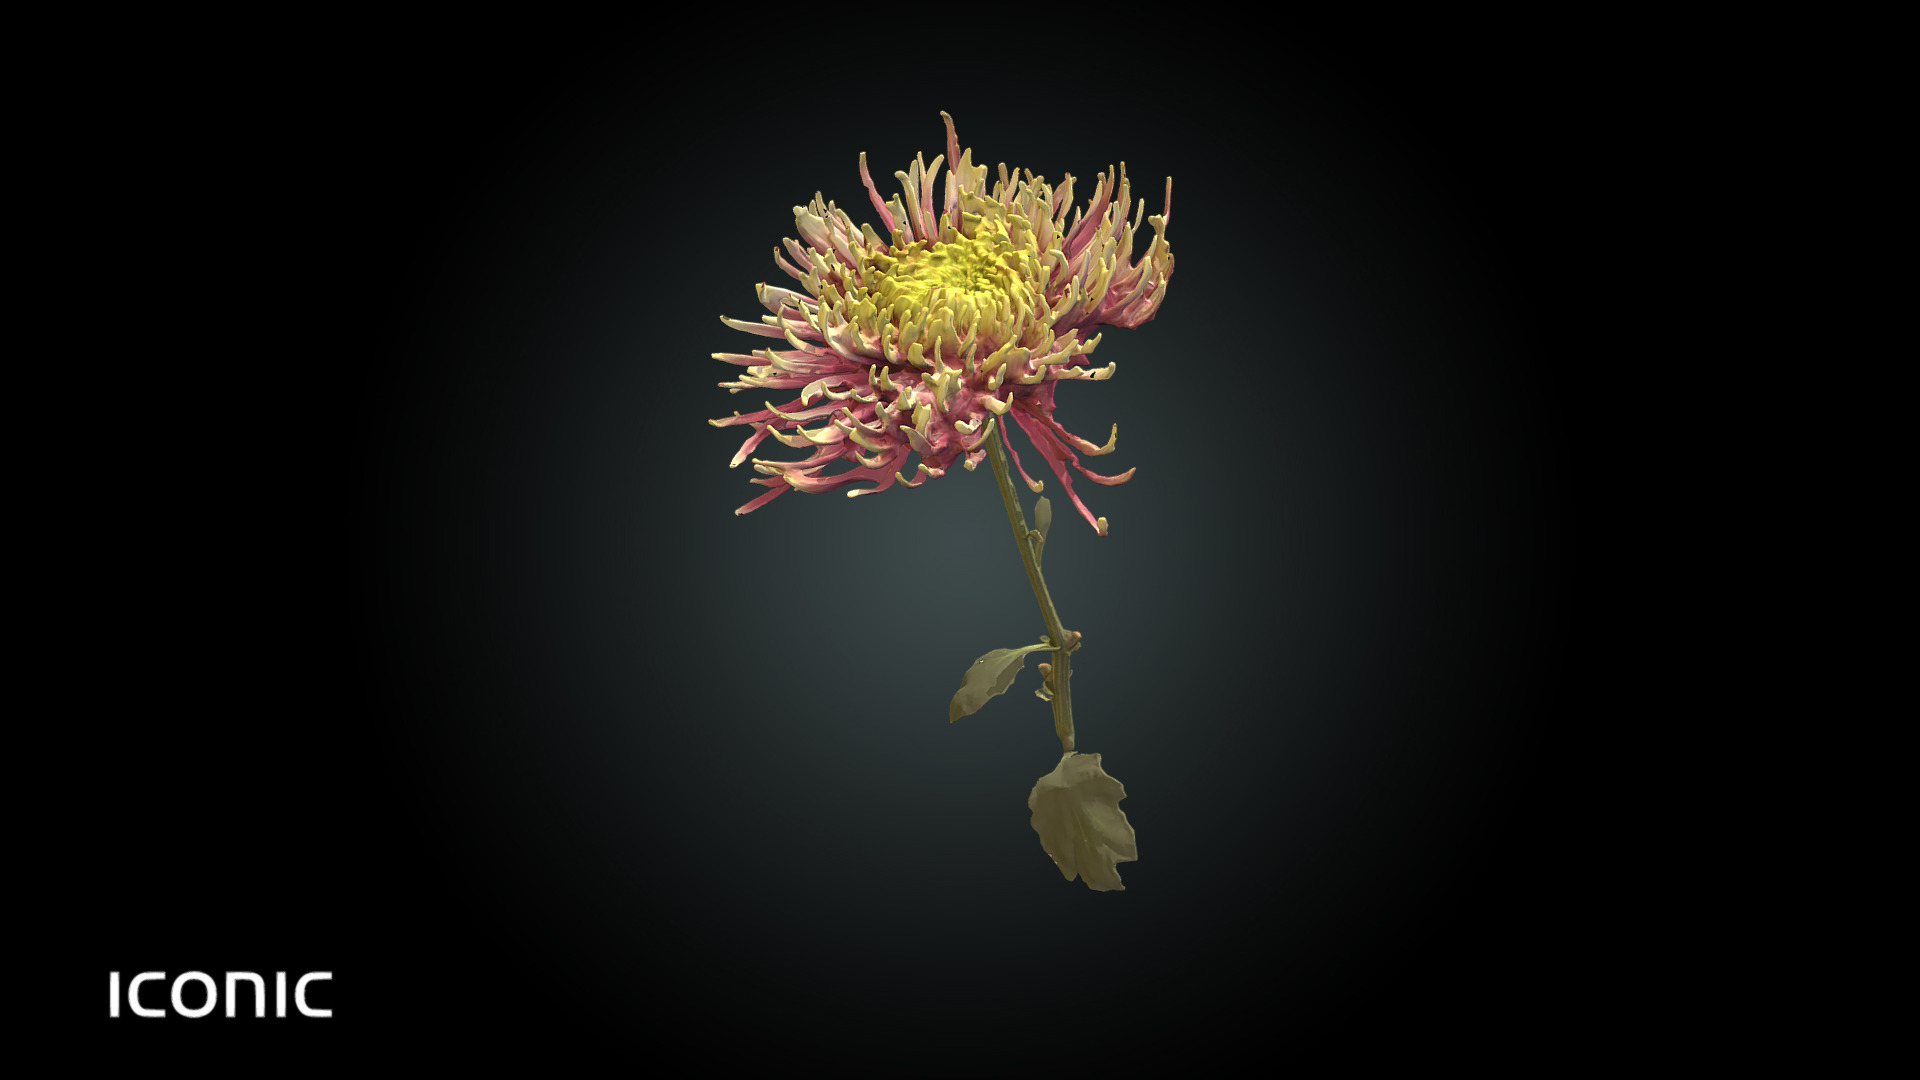 3D model Fw4 – Coxcomb Flower - This is a 3D model of the Fw4 - Coxcomb Flower. The 3D model is about a red and yellow flower.